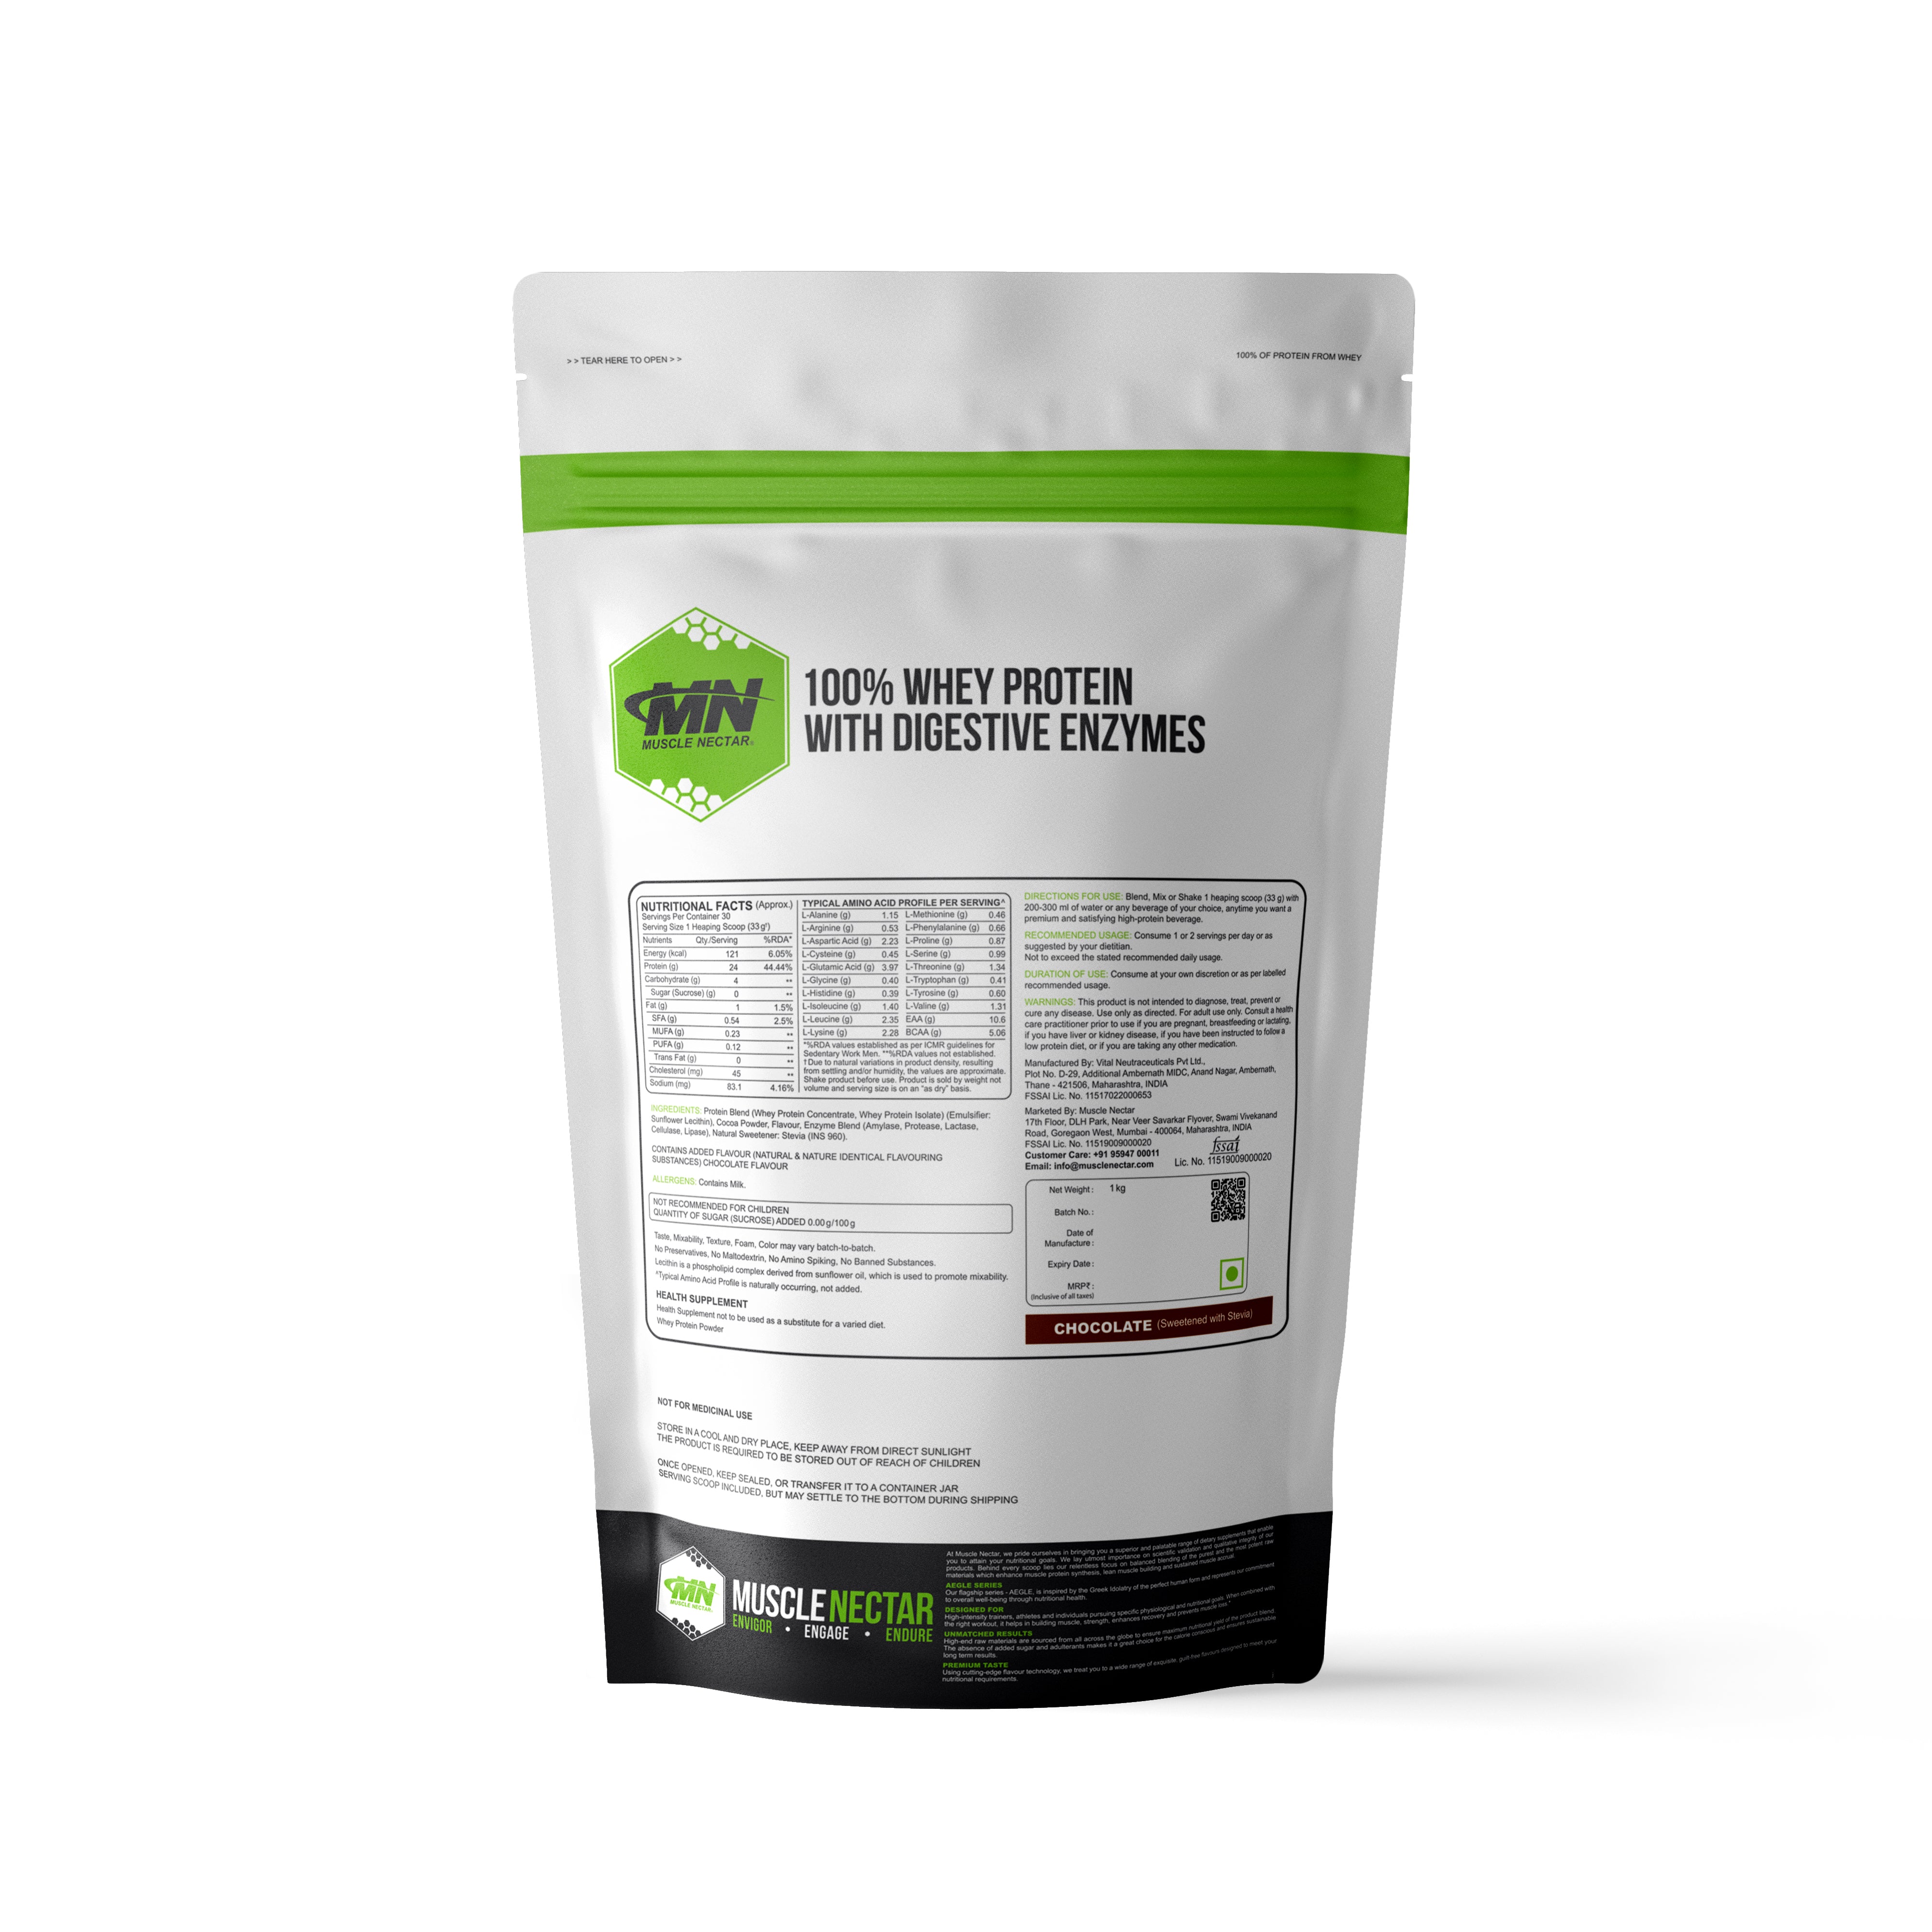 100% Whey Protein Powder (Blend of Concentrate & Isolate) with Digestive Enzymes